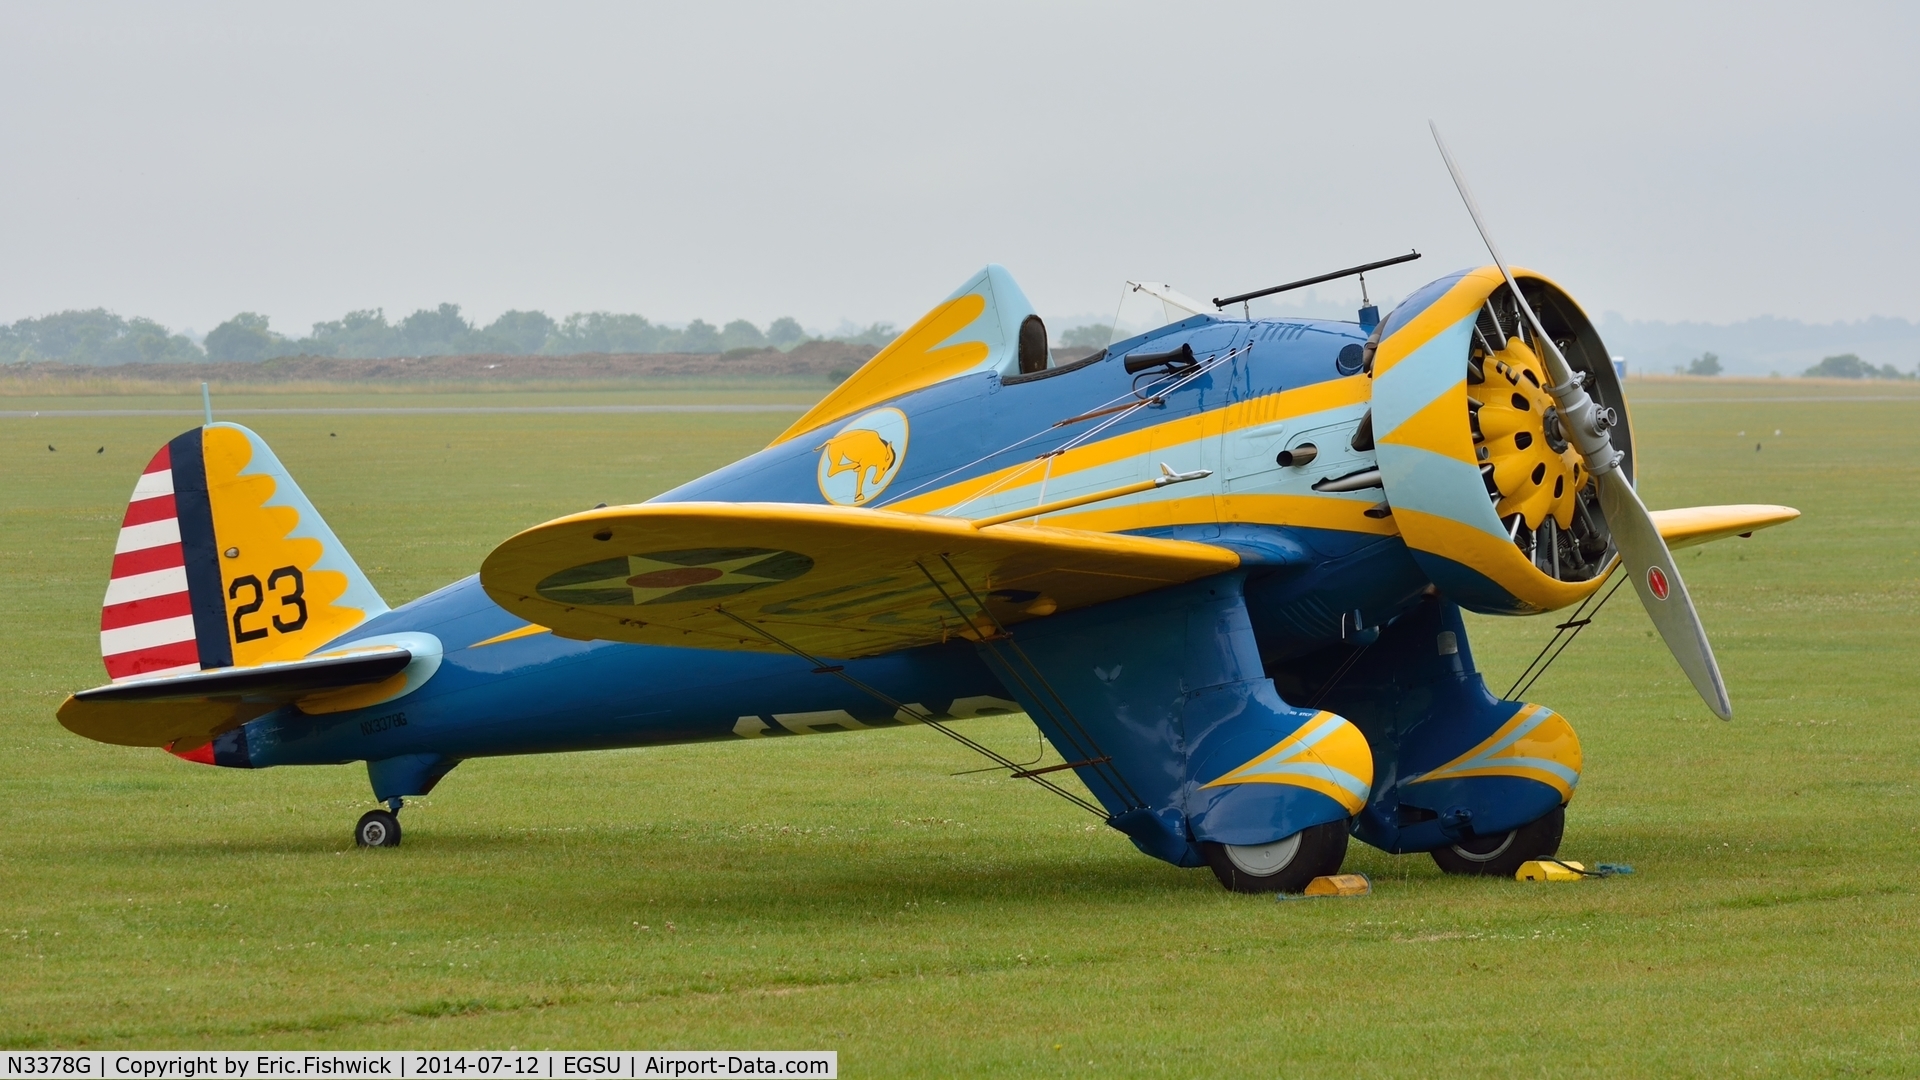 N3378G, 1933 Boeing P-26 Peashooter C/N 33123, 2. N3378G 'Peashooter' emerging from the mist at The Flying Legends Air Show, IWM Duxford. July,2014.